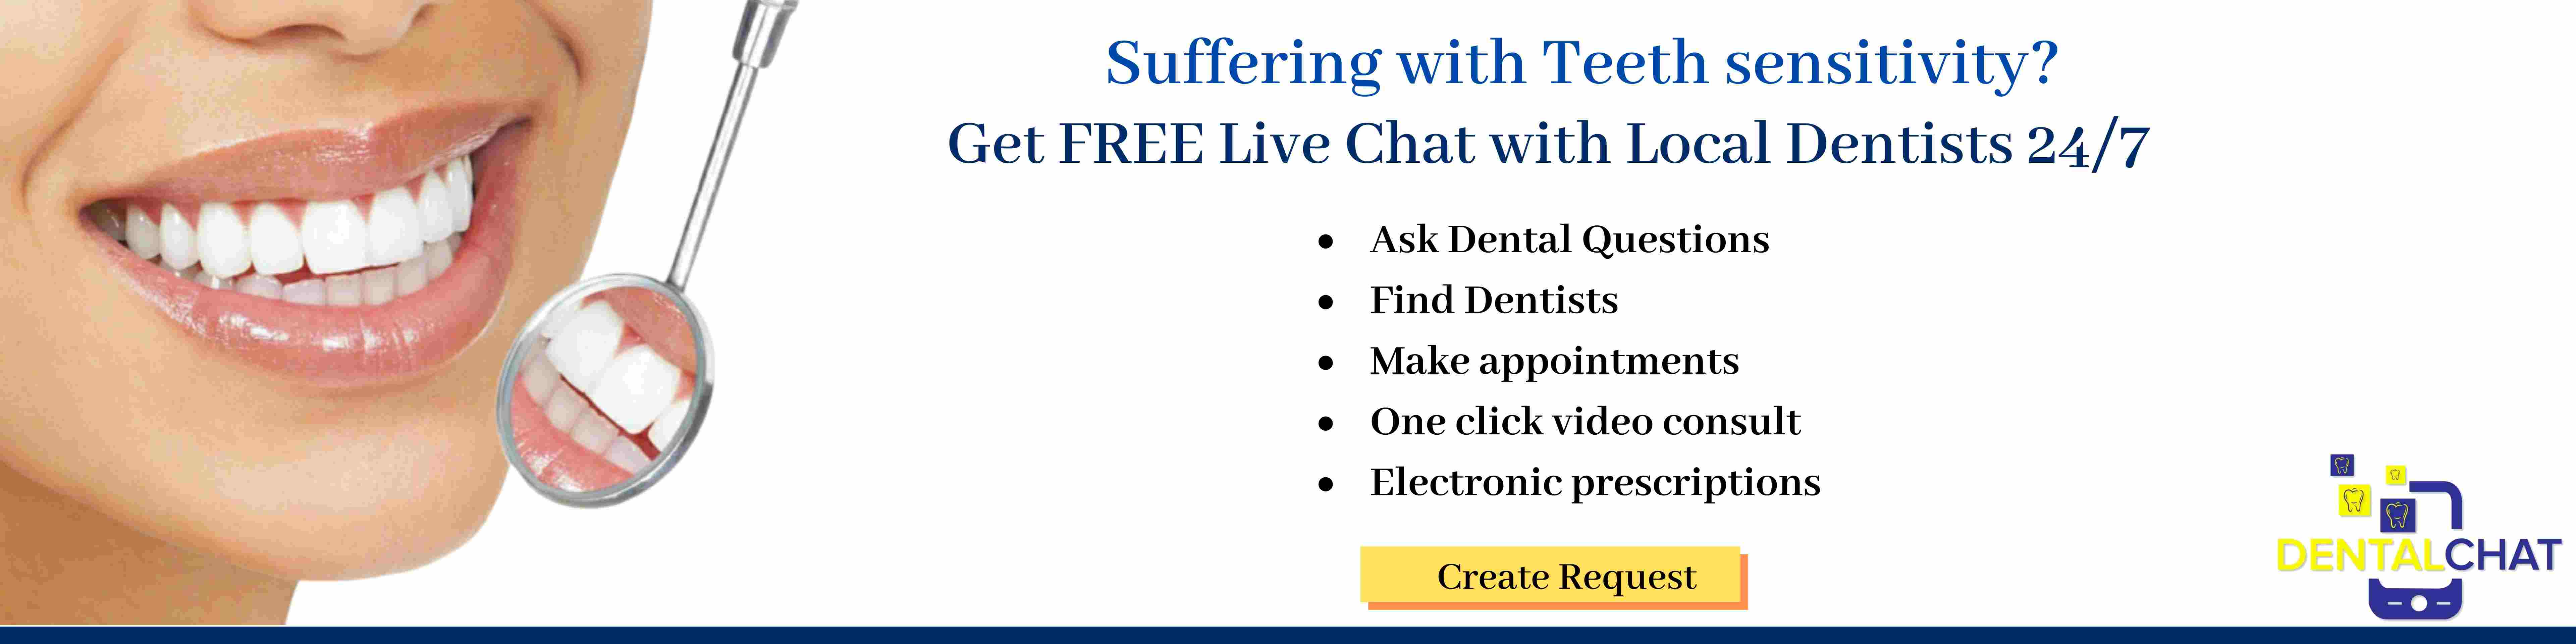 Tooth sensitive answers and local teeth sensitivity problem questions online